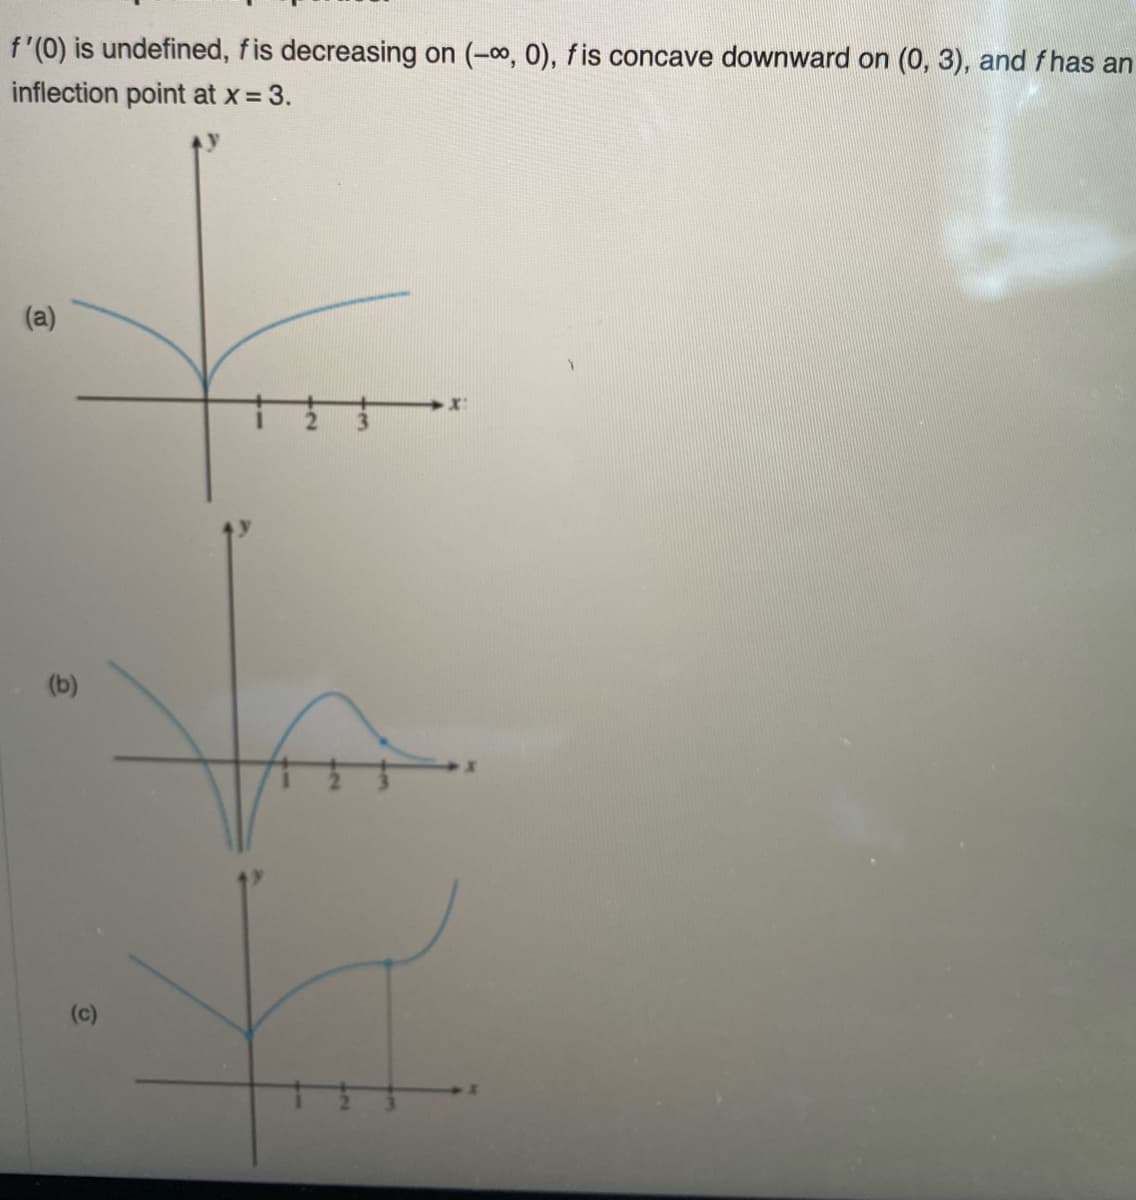 f'(0) is undefined, fis decreasing on (-0, 0), fis concave downward on (0, 3), and fhas an
inflection point at x = 3.
(a)
(b)
(c)
